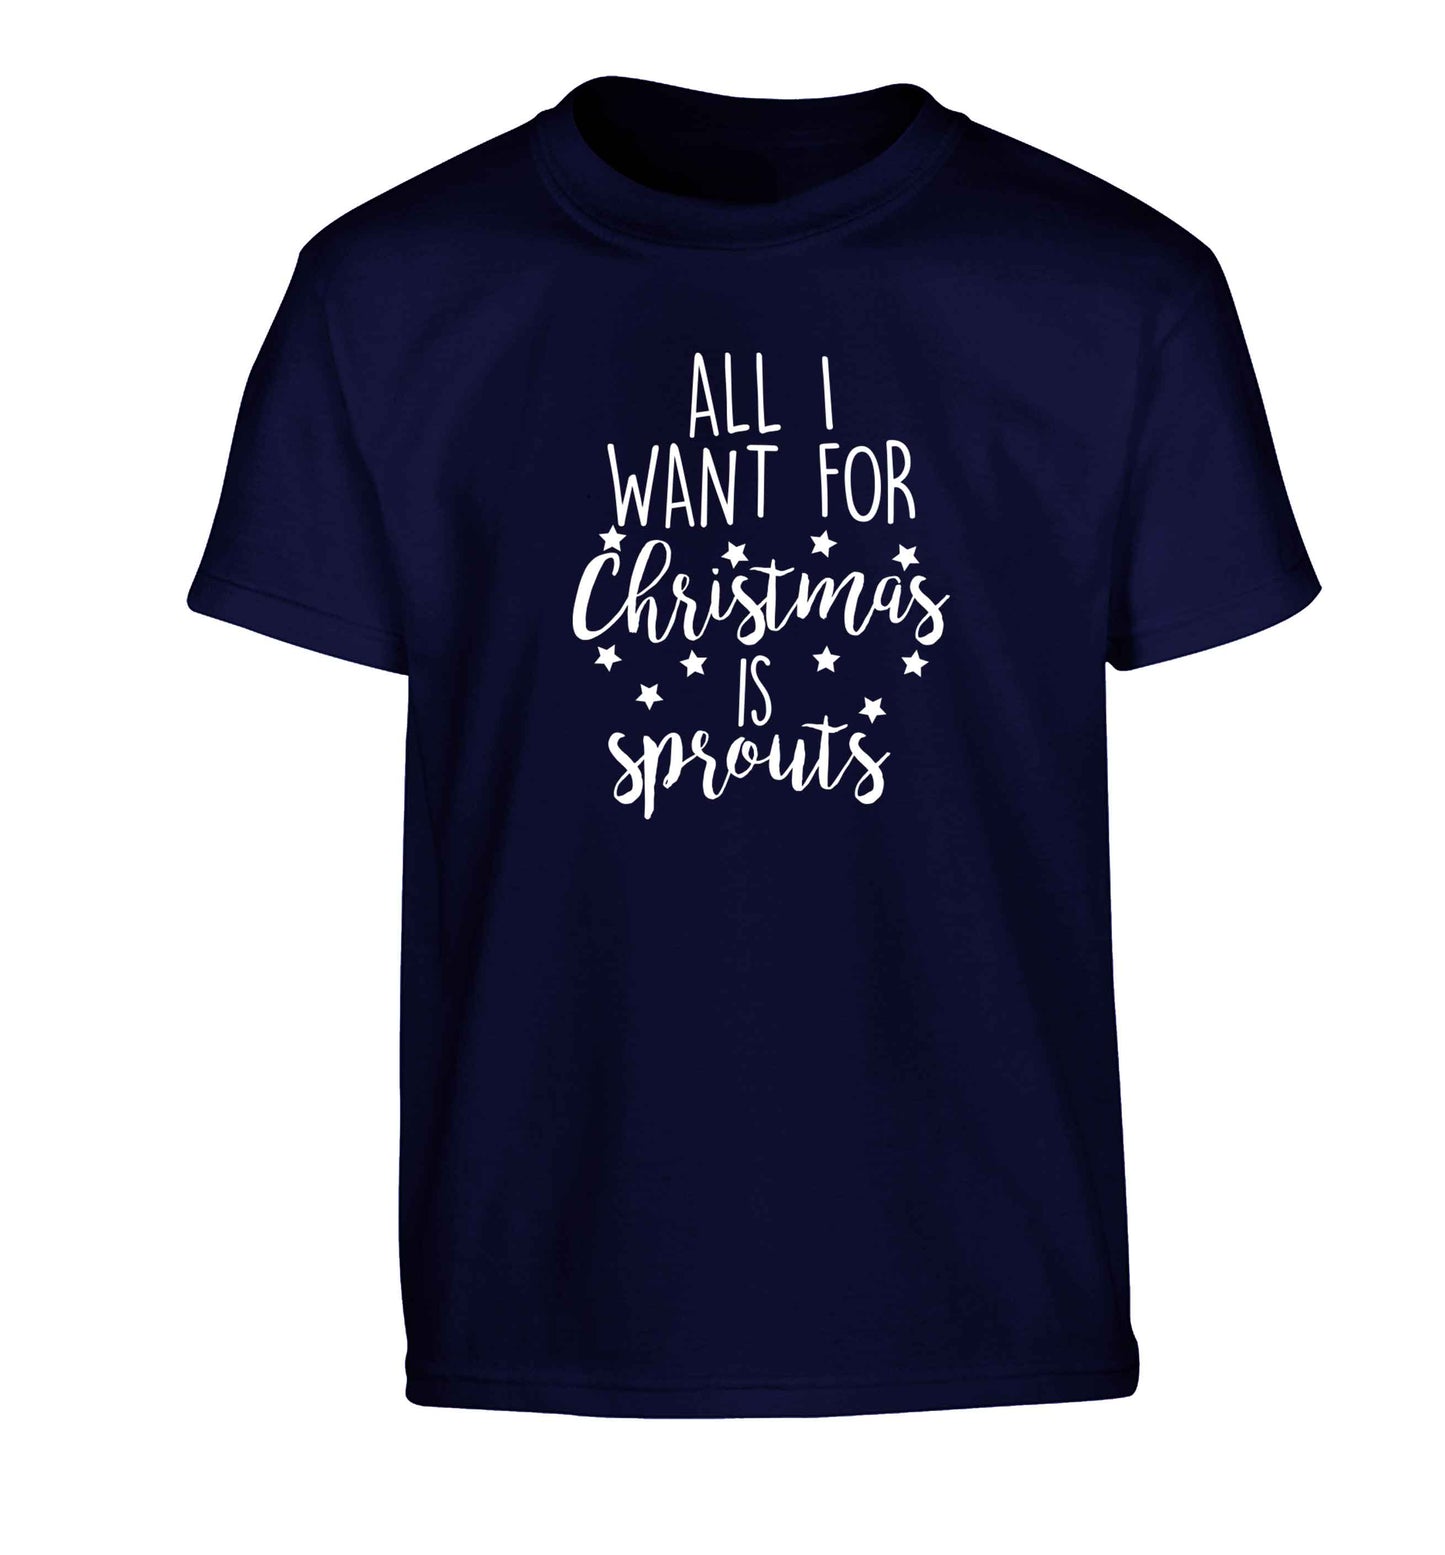 All I want for Christmas is sprouts Children's navy Tshirt 12-13 Years